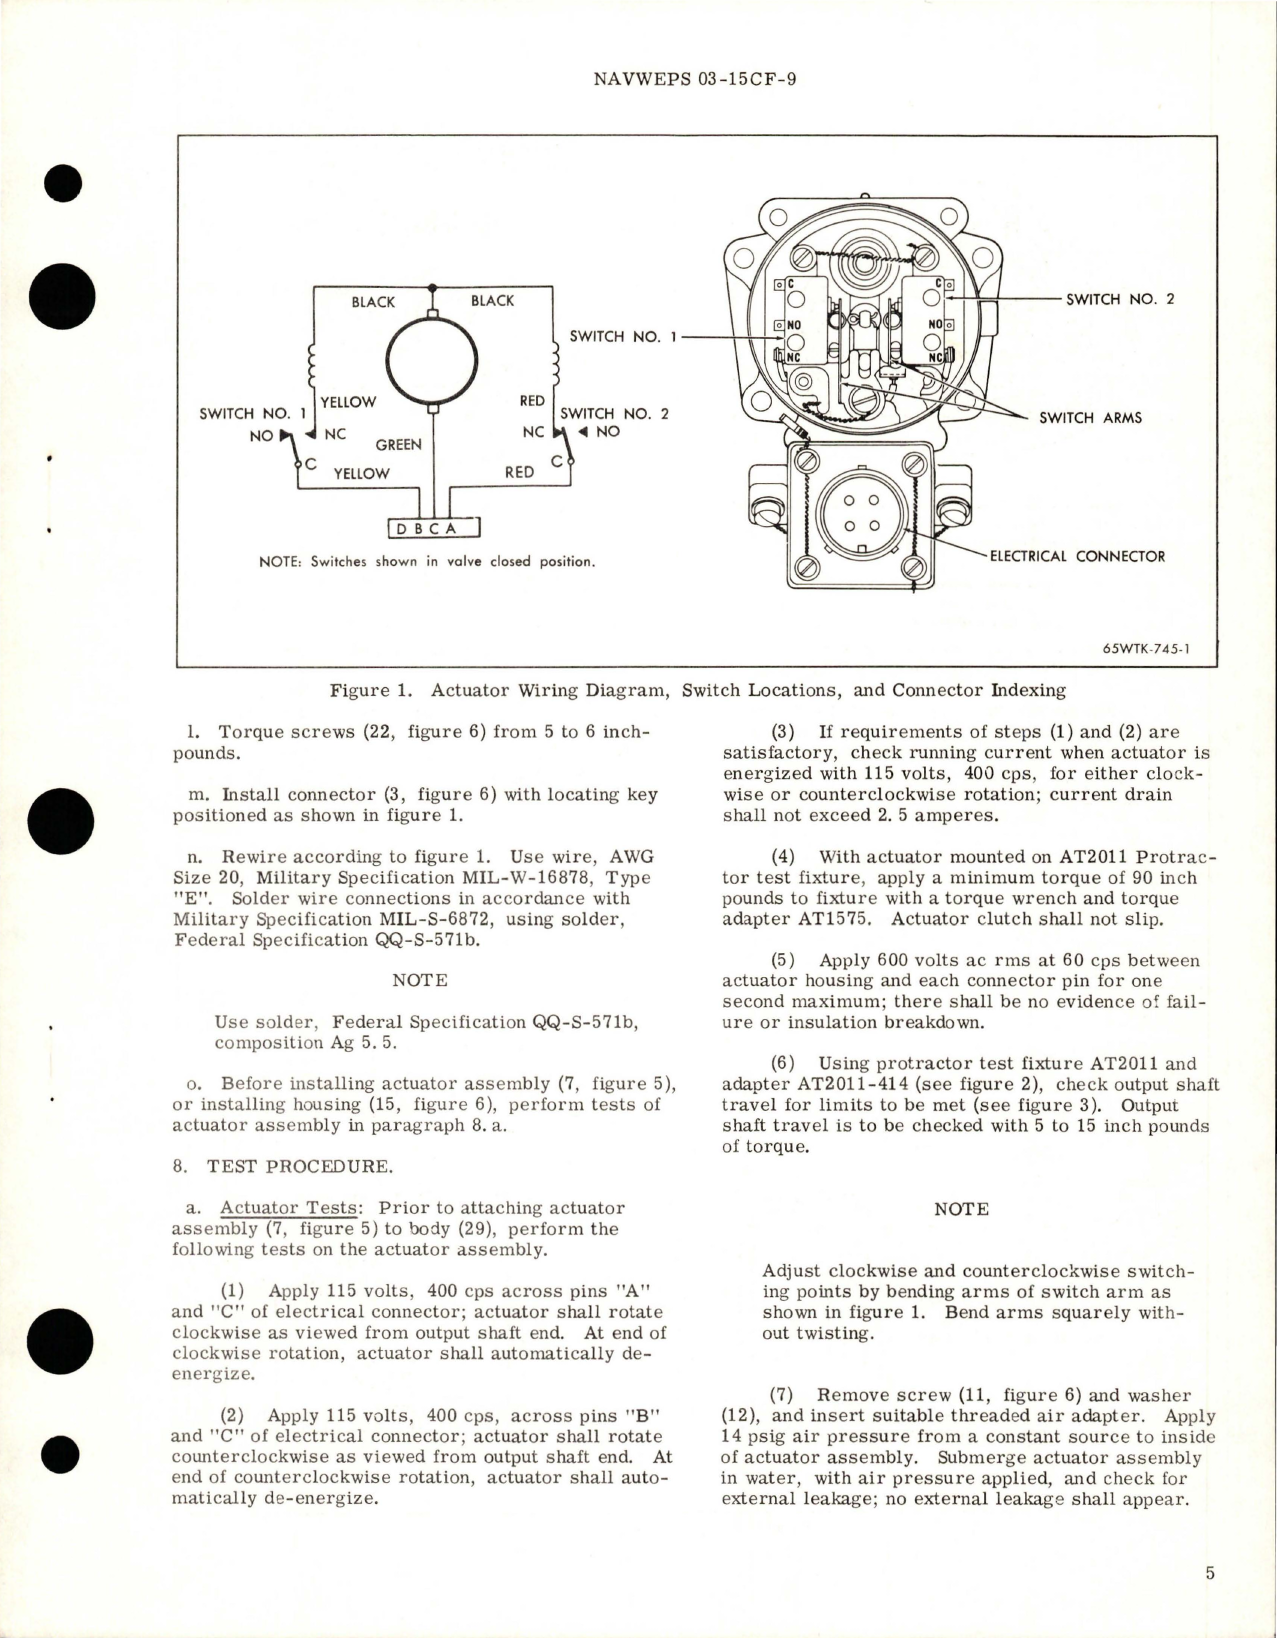 Sample page 7 from AirCorps Library document: Overhaul Instructions with Parts Breakdown for Motor Actuated Gate Shutoff Valve - Part 126335